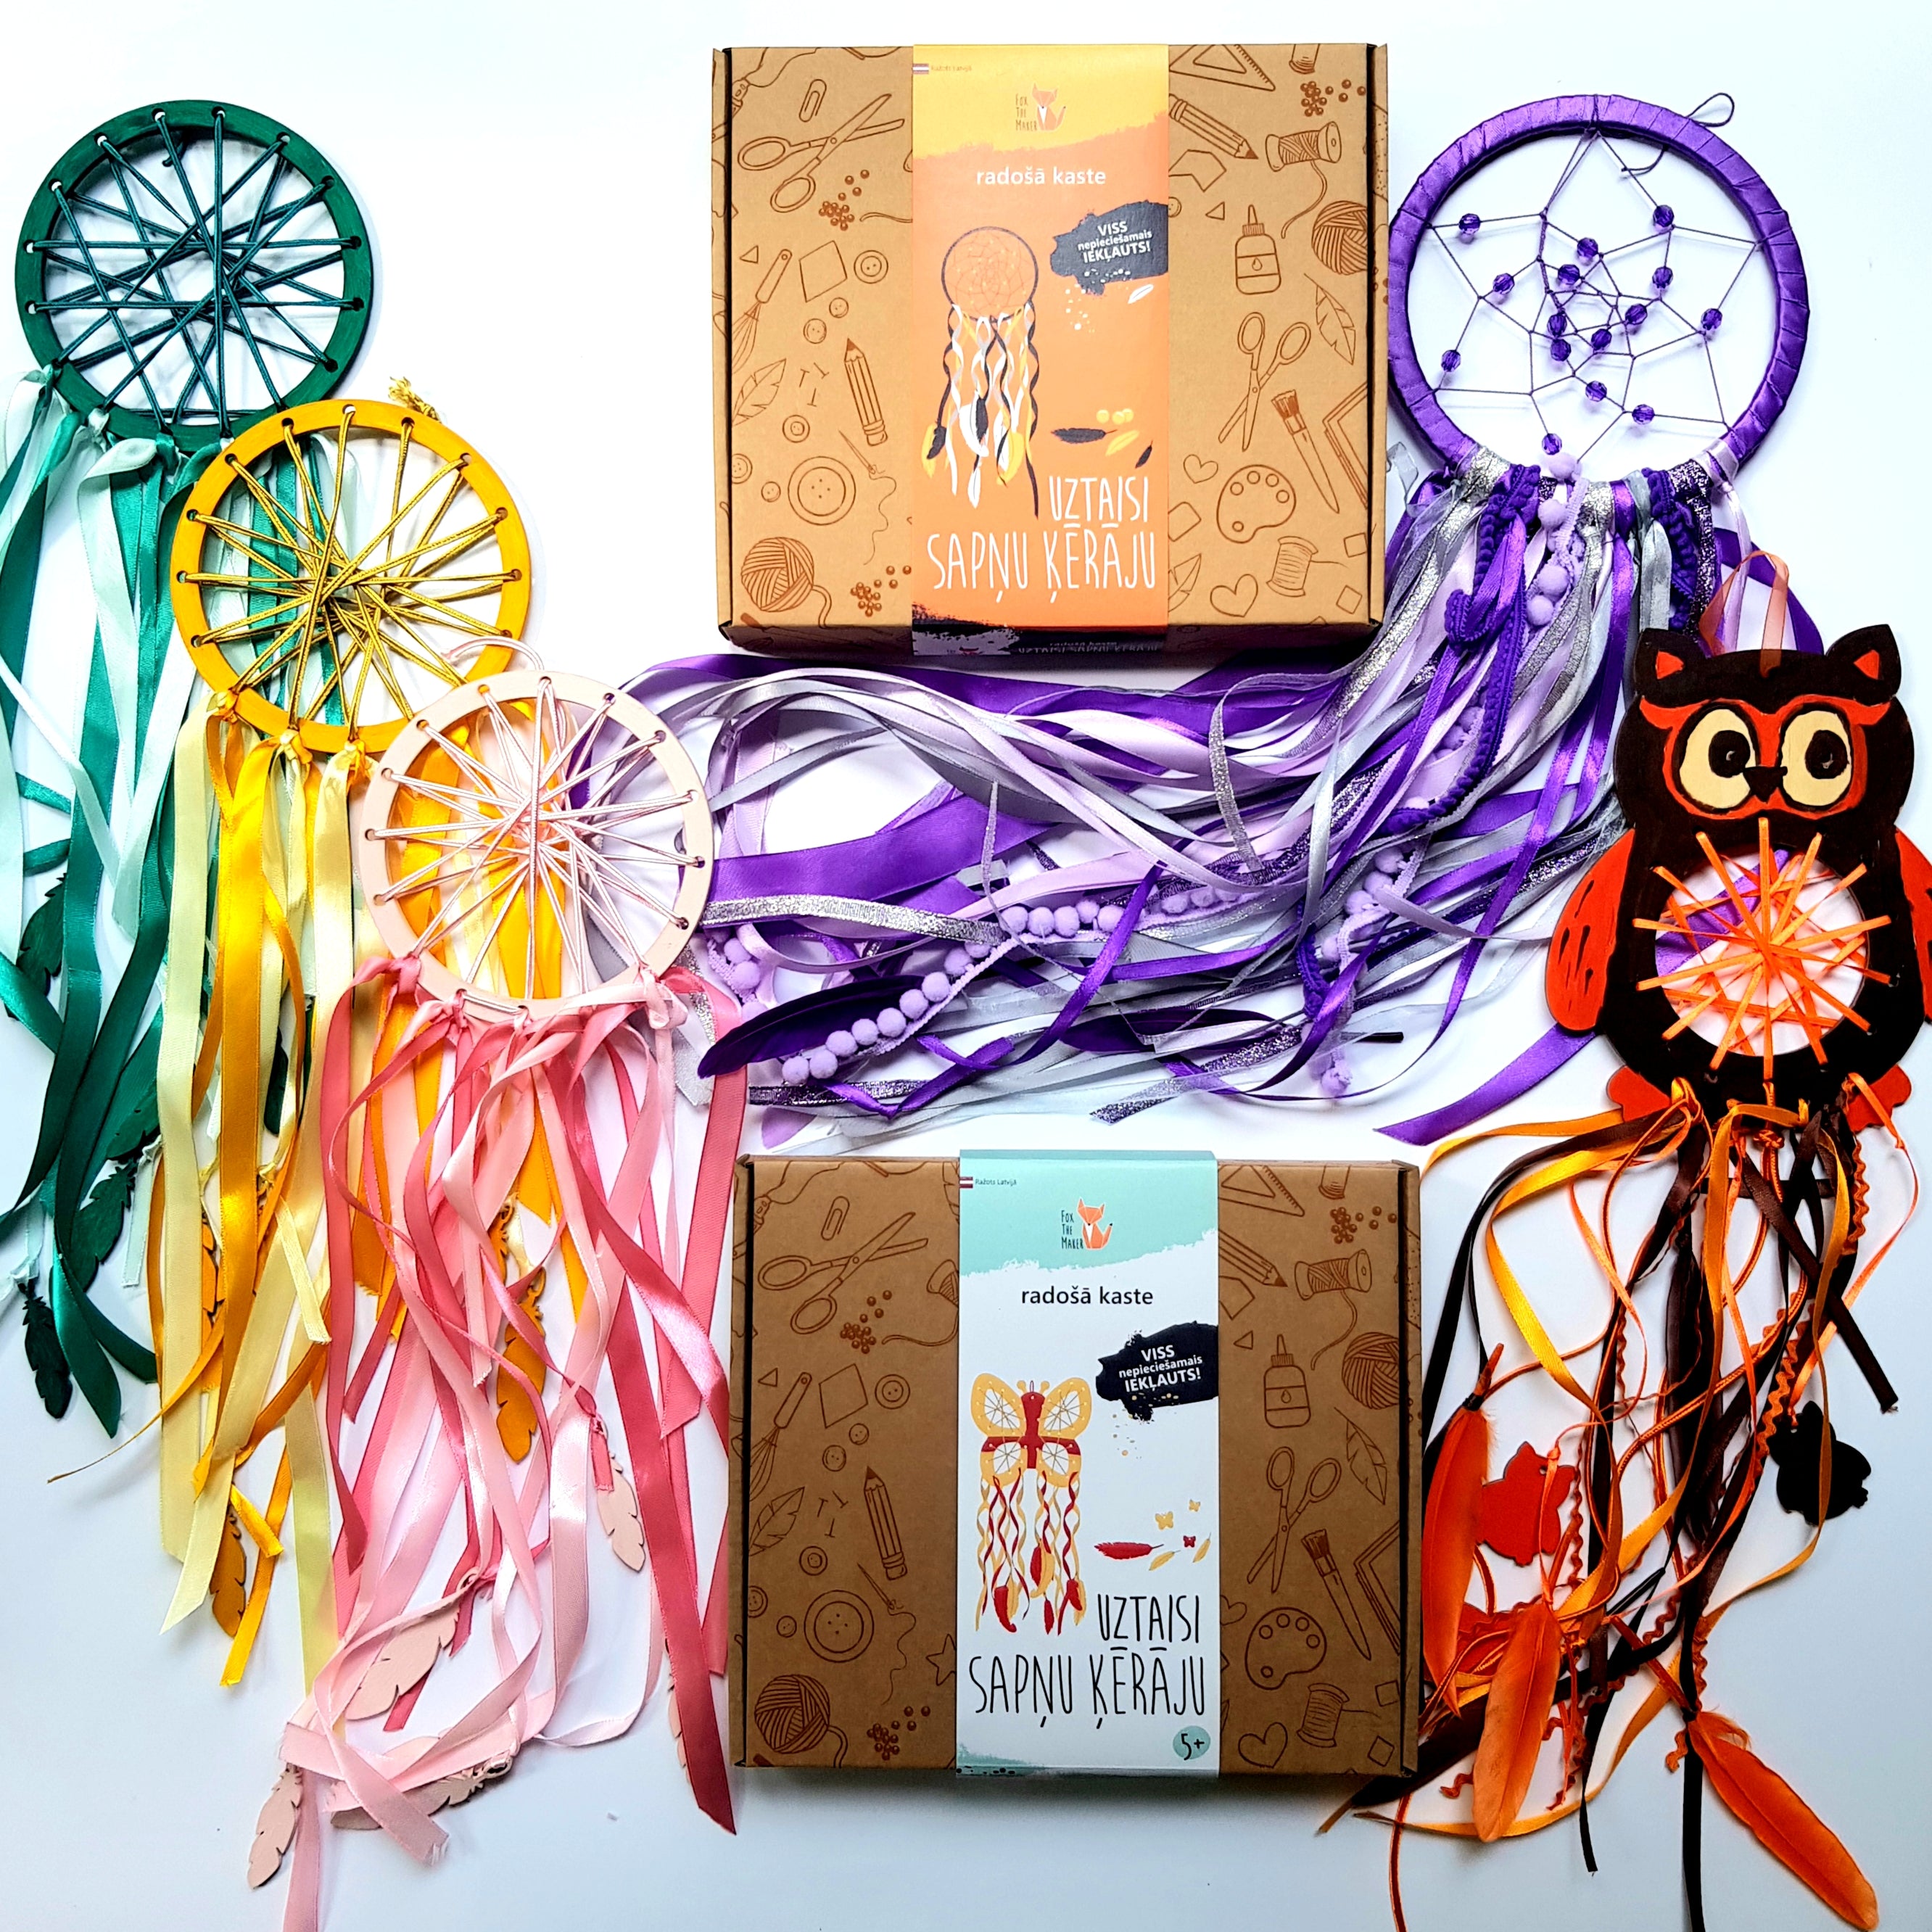 Dream Catcher Kit, DIY Dreamcatcher Kit for Kids, Gifts for Crafty Girls,  Unique Crafts Kit for Girls, Creative Kits, Craft for Christmas 